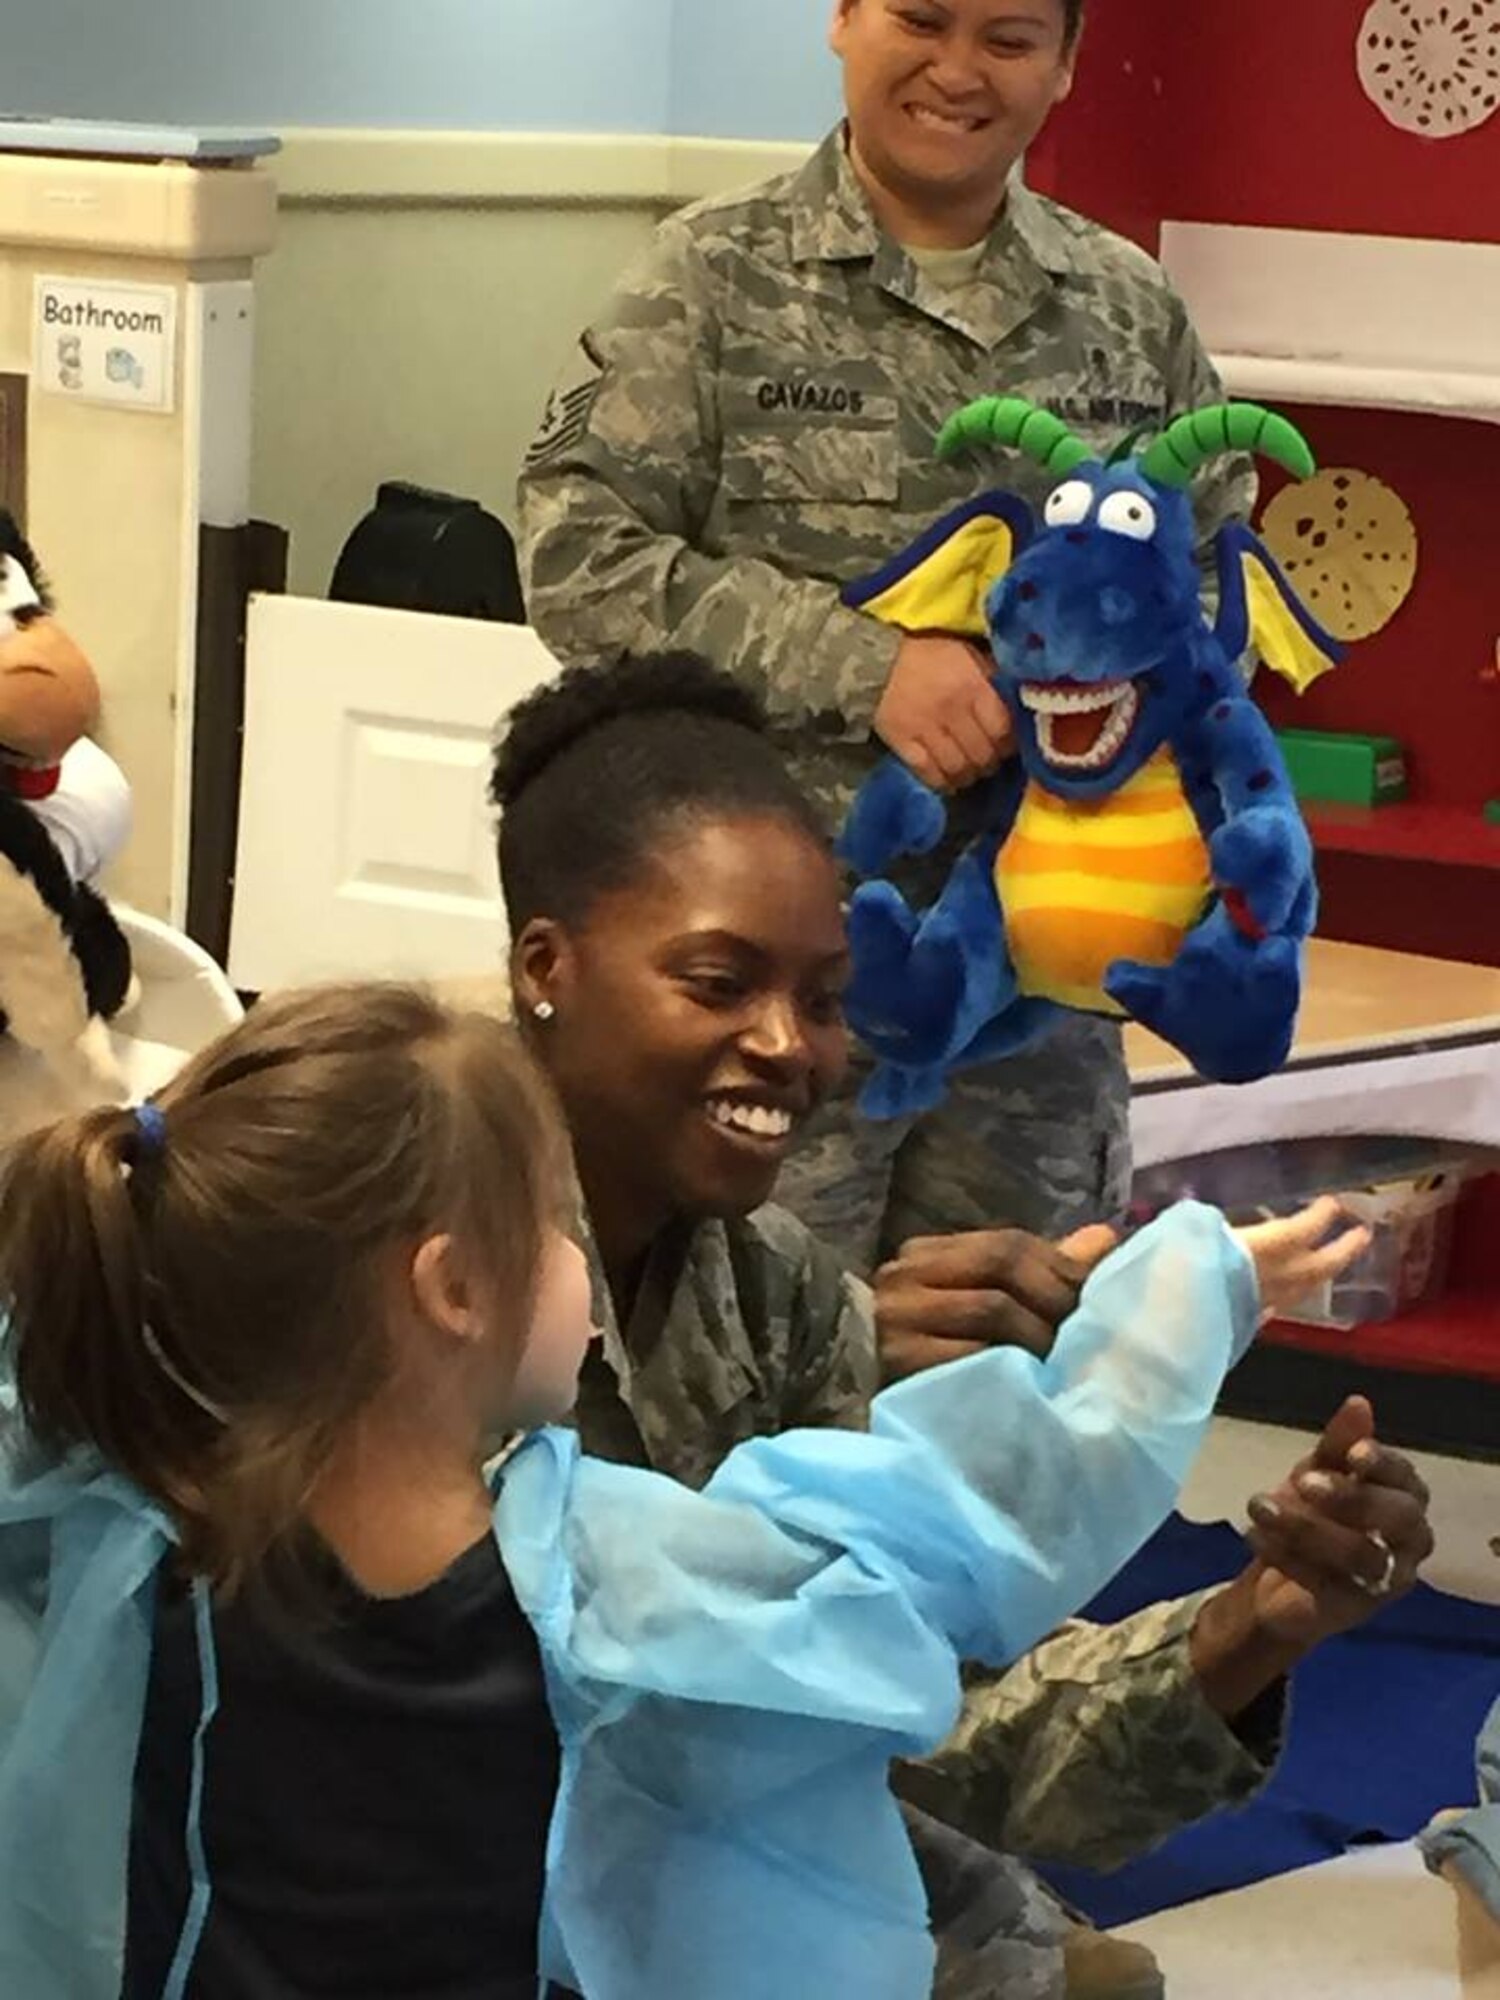 On Feb. 5, members of the Dental Squadron from the 779th Medical Group went to the Child Development Center on Joint Base Andrews to teach the kids about good dental health.  Tech. Sgt. Tina Phelps-Prince, NCOIC for preventive dentistry, helped one member of the class to dress up as a dentist.  (AF photo by Melanie Moore/Released)

